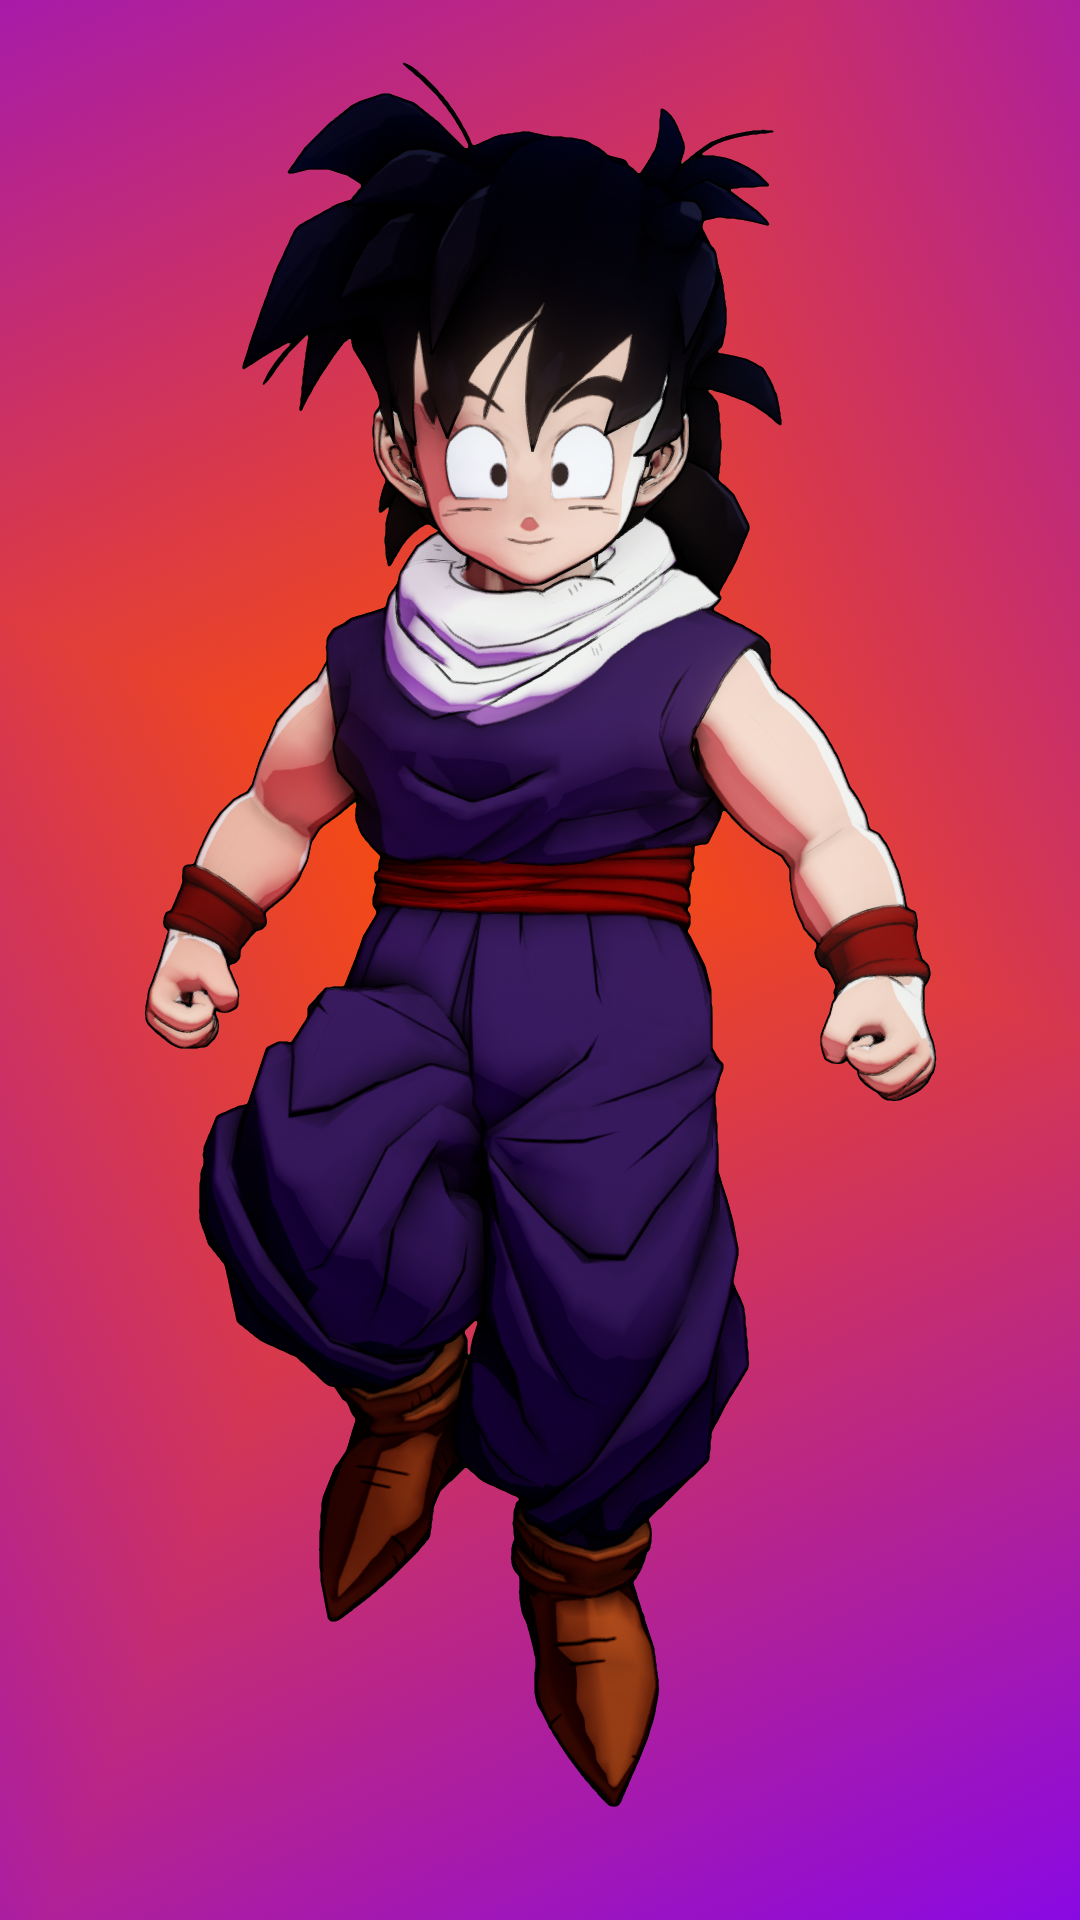 Made a mobile wallpaper of Gohan. 16:9 version in comments